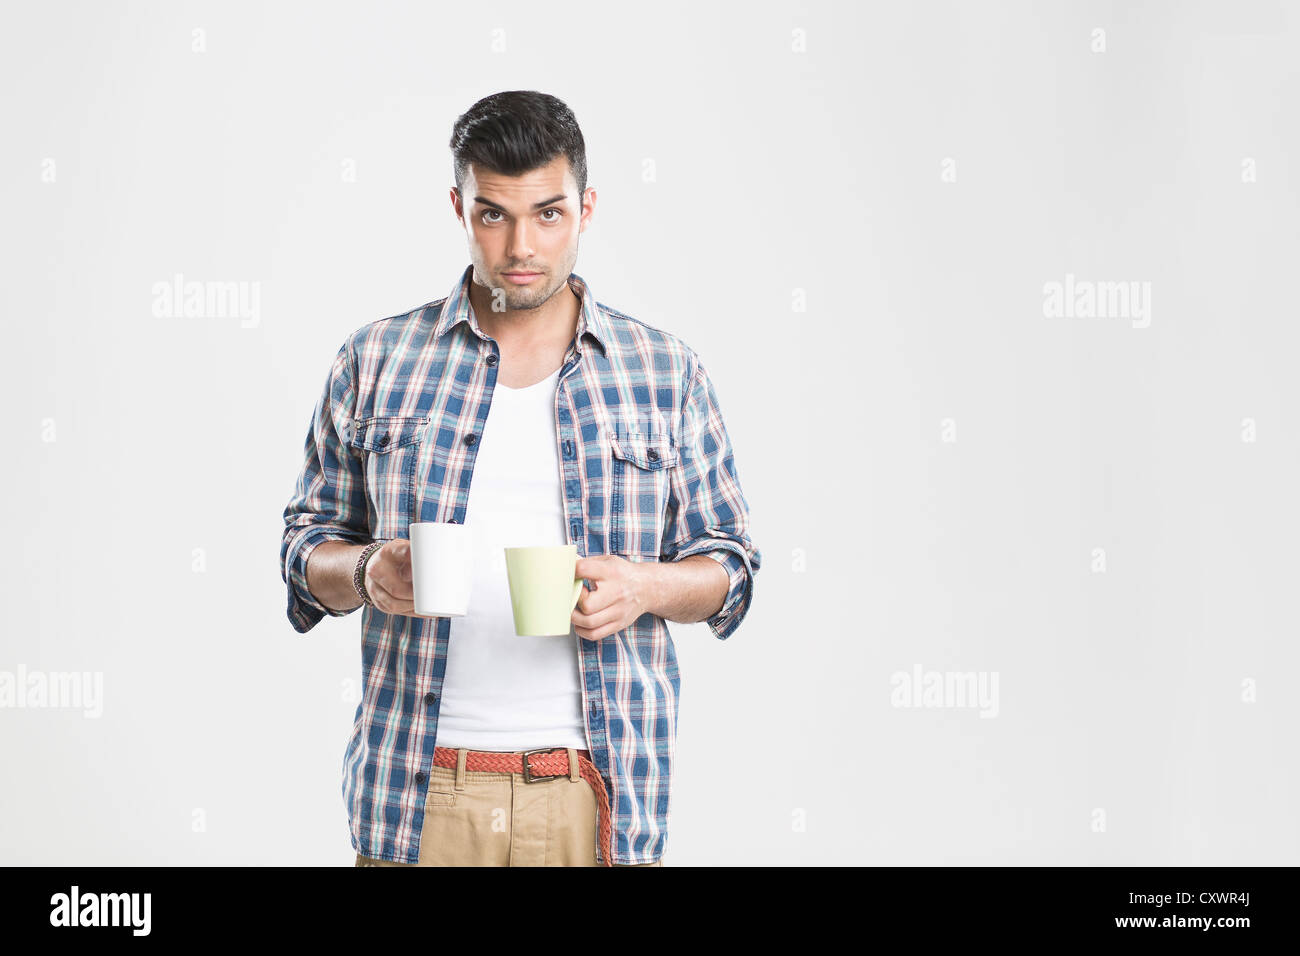 Man holding cups of coffee Stock Photo